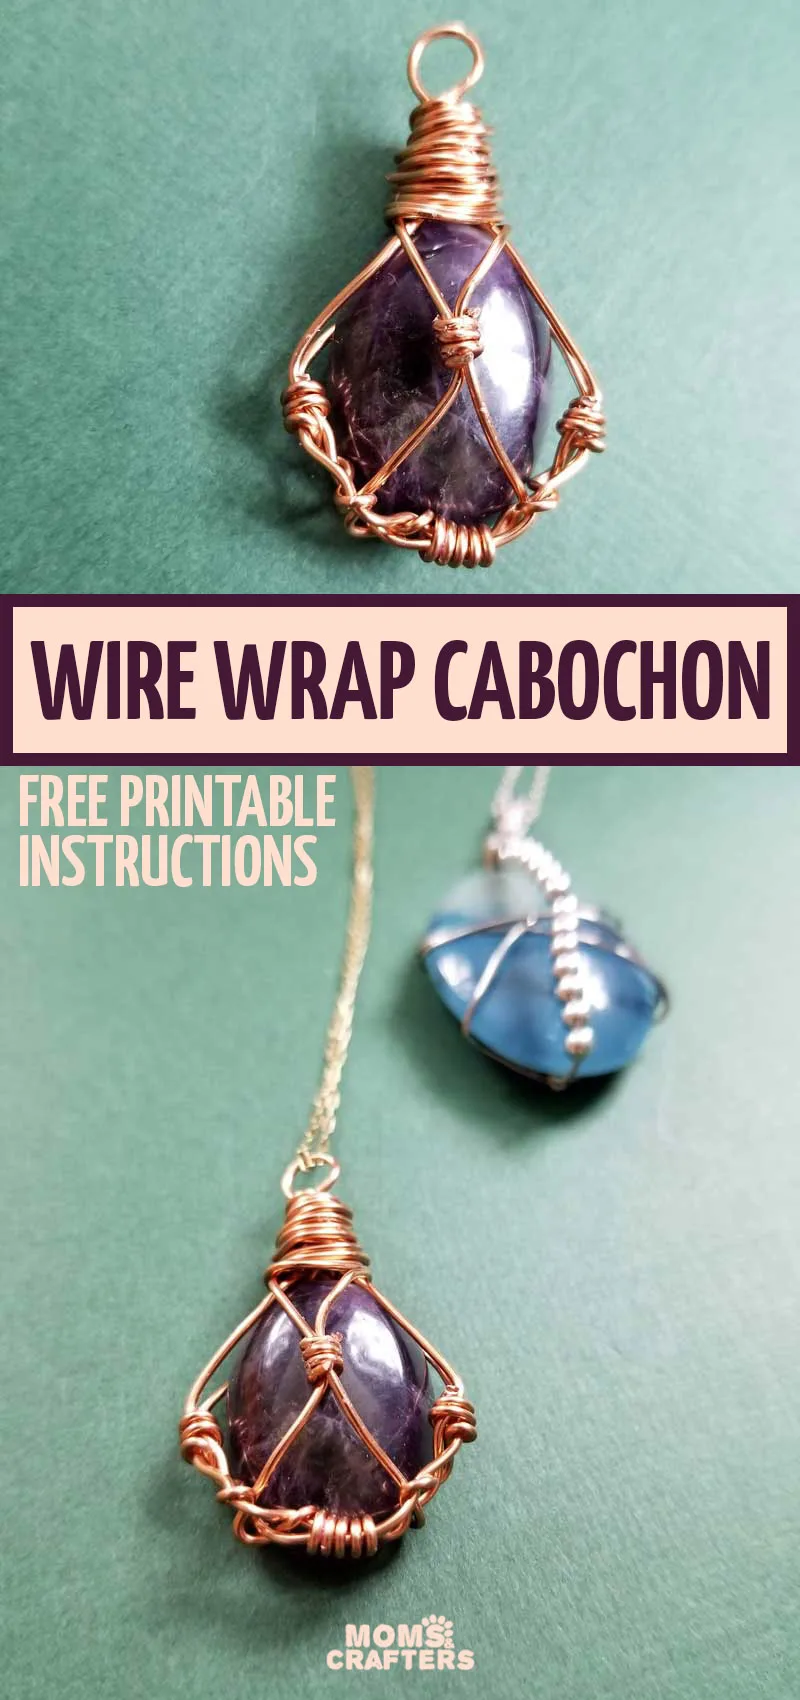 Free printable pattern and instructions to make a DIY wire wrap stone cabochon pendant. This stunning jewelry making craft is fun and easy to follow. 